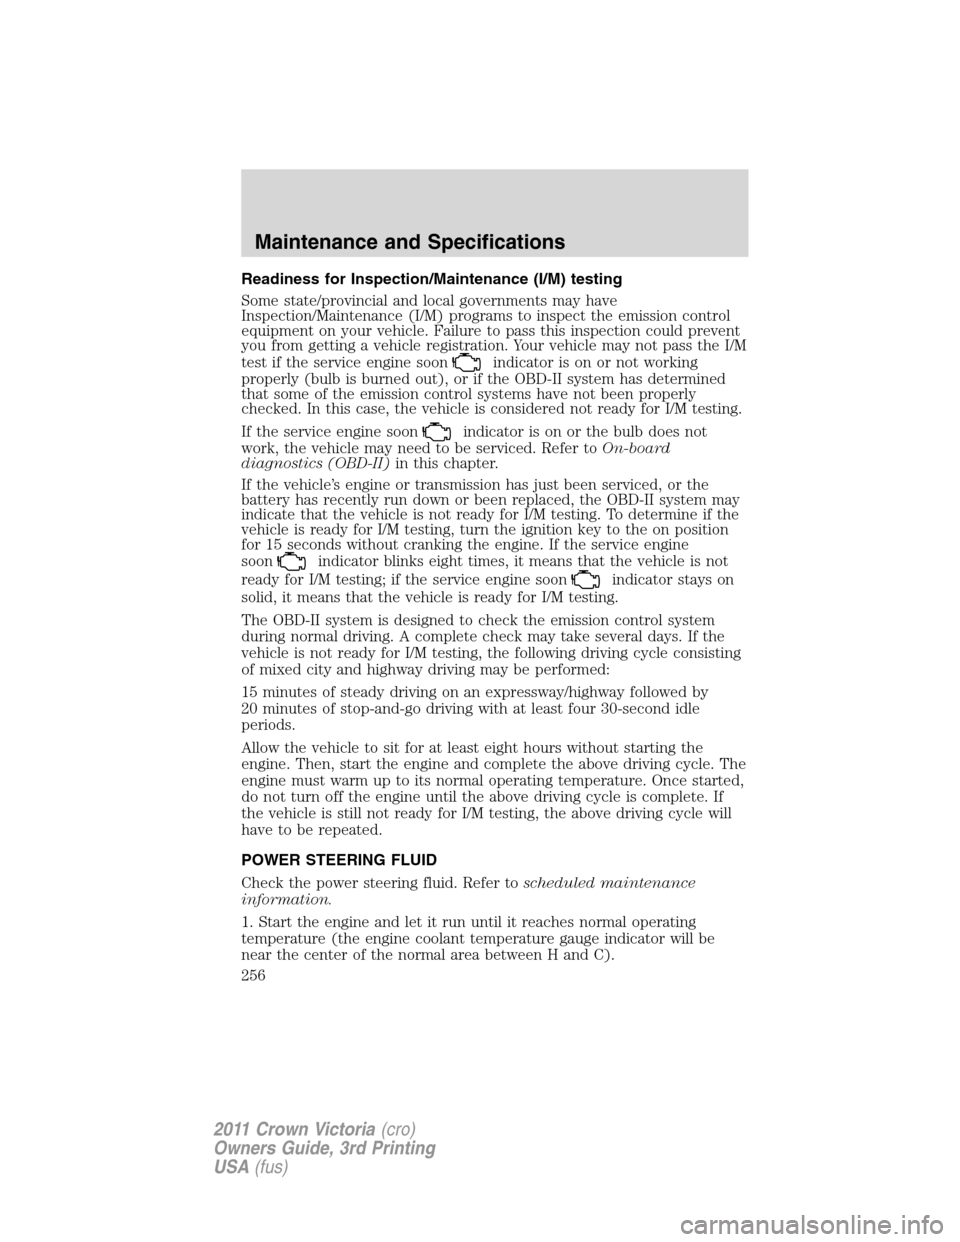 FORD CROWN VICTORIA 2011 2.G Service Manual Readiness for Inspection/Maintenance (I/M) testing
Some state/provincial and local governments may have
Inspection/Maintenance (I/M) programs to inspect the emission control
equipment on your vehicle.